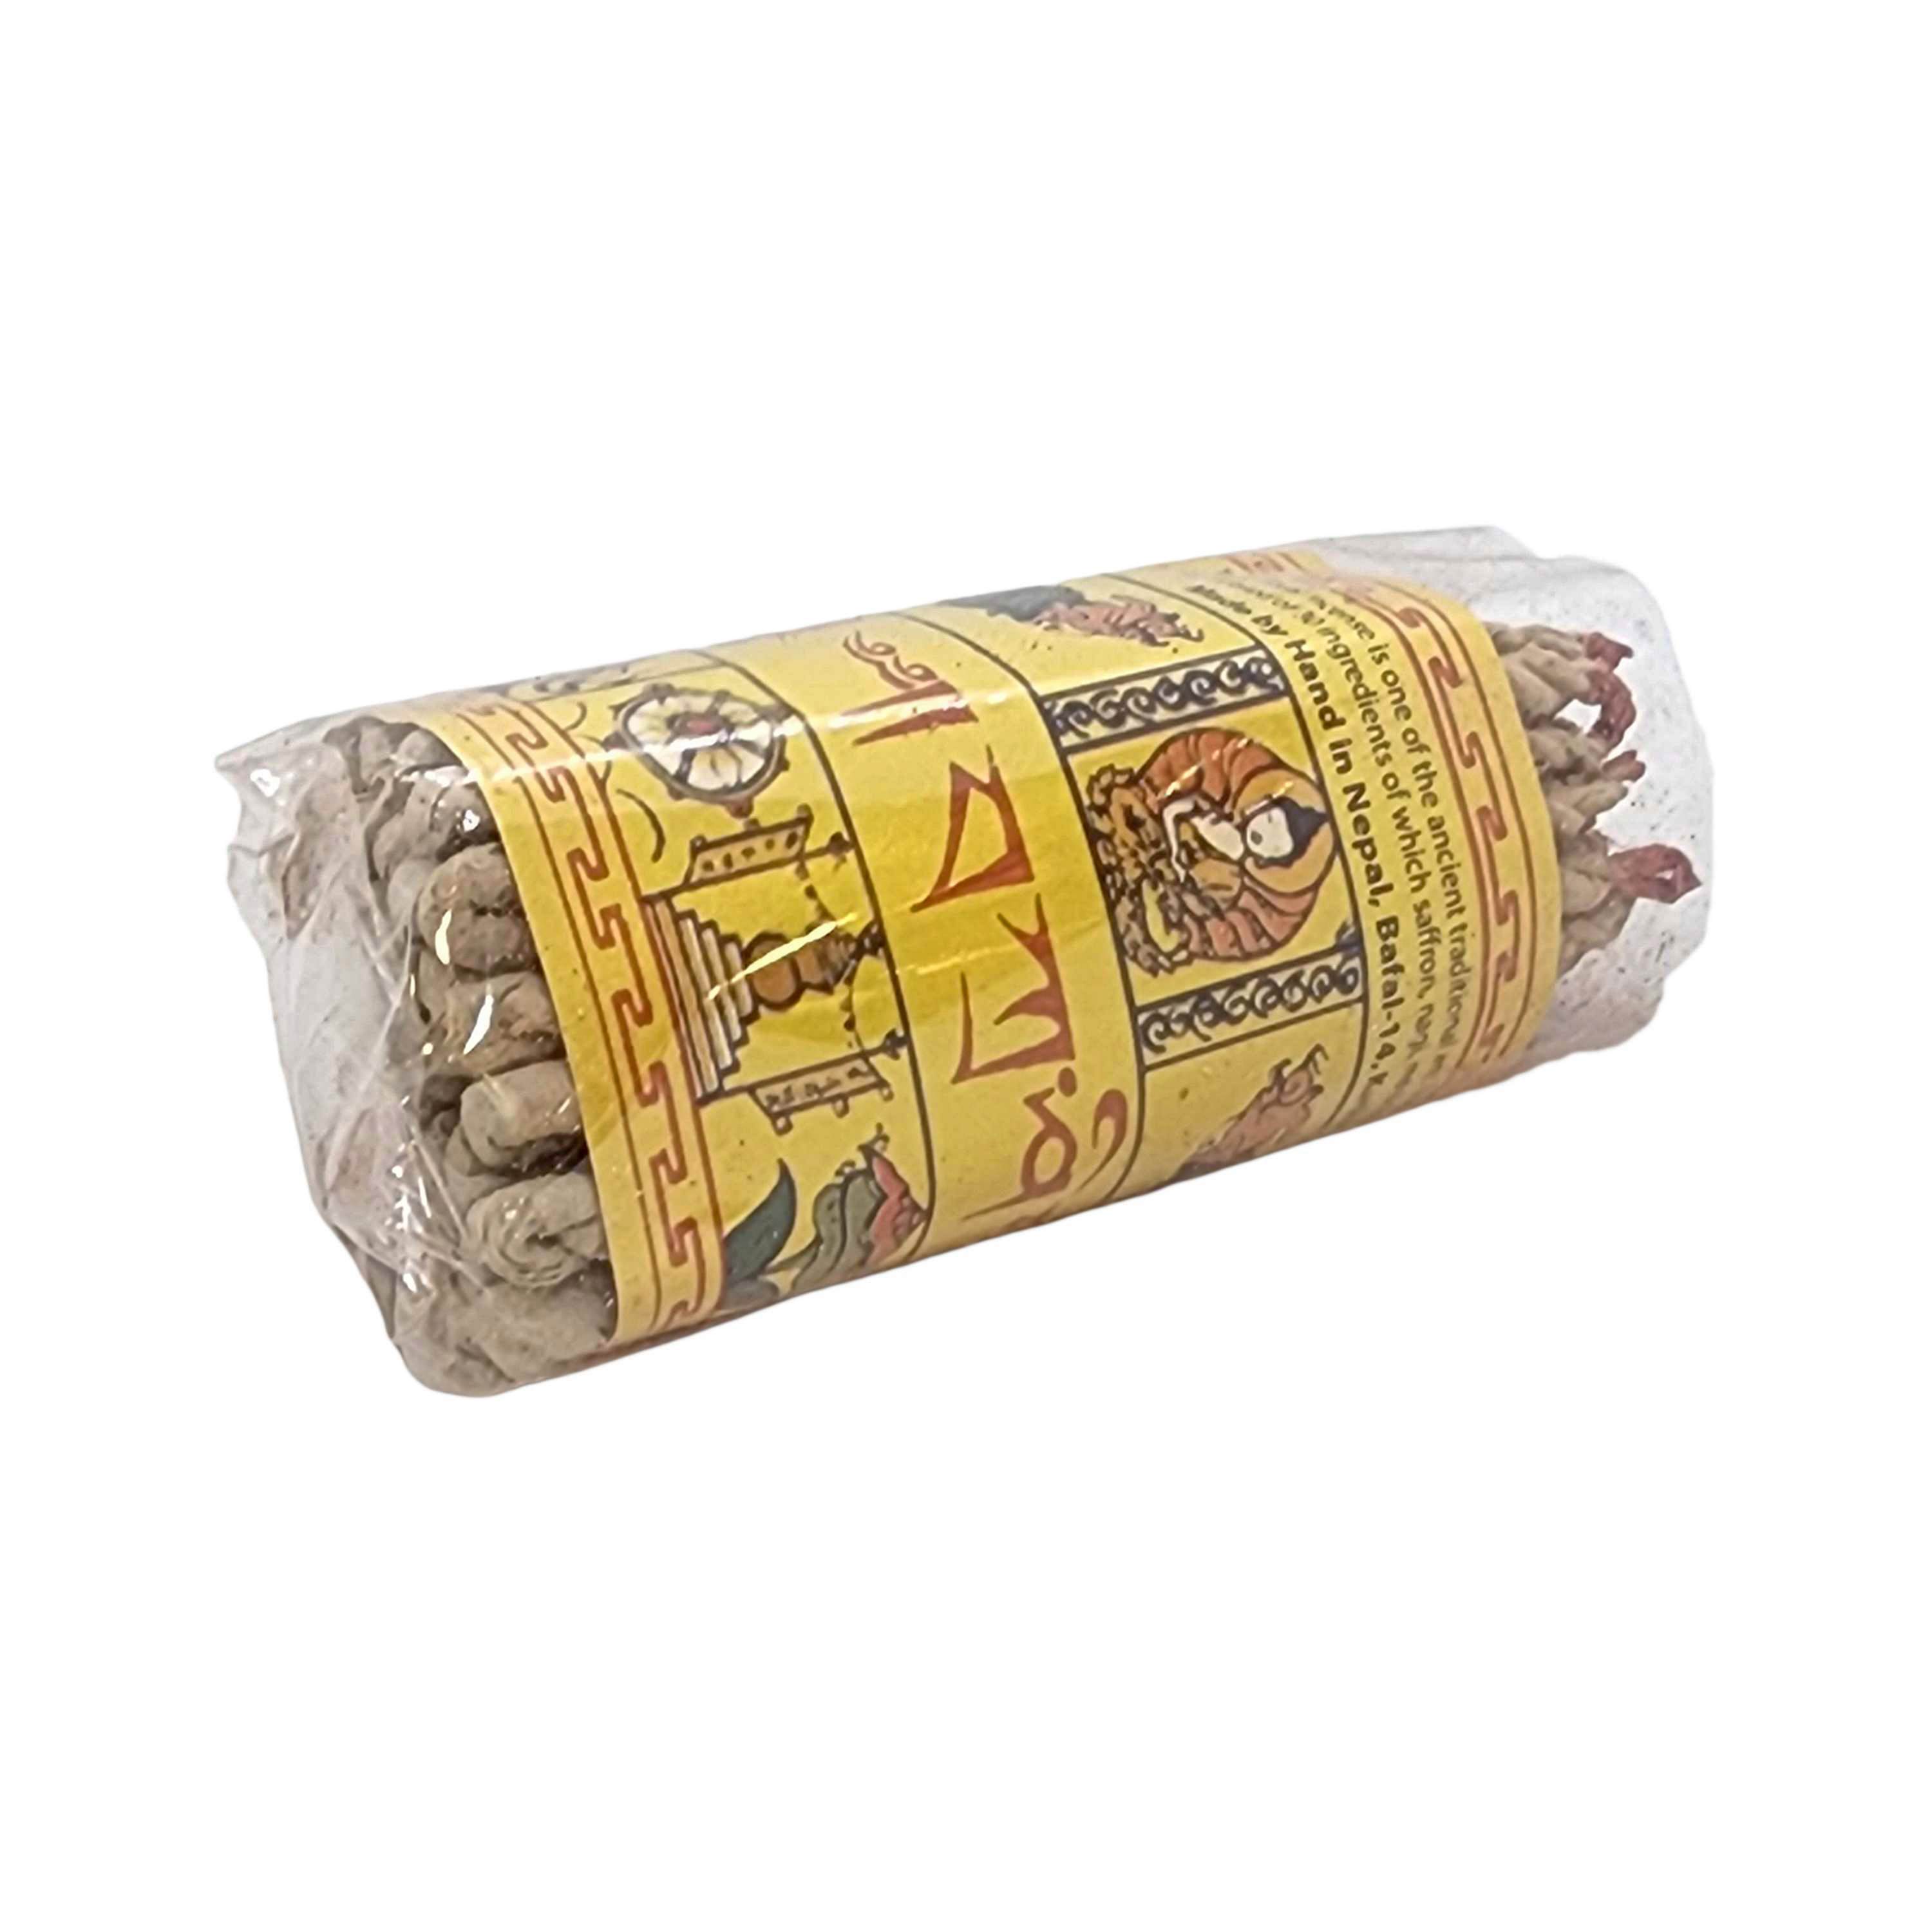 Tashi Traditional Handmade Rope Incense, high Quality, Made In Nepal